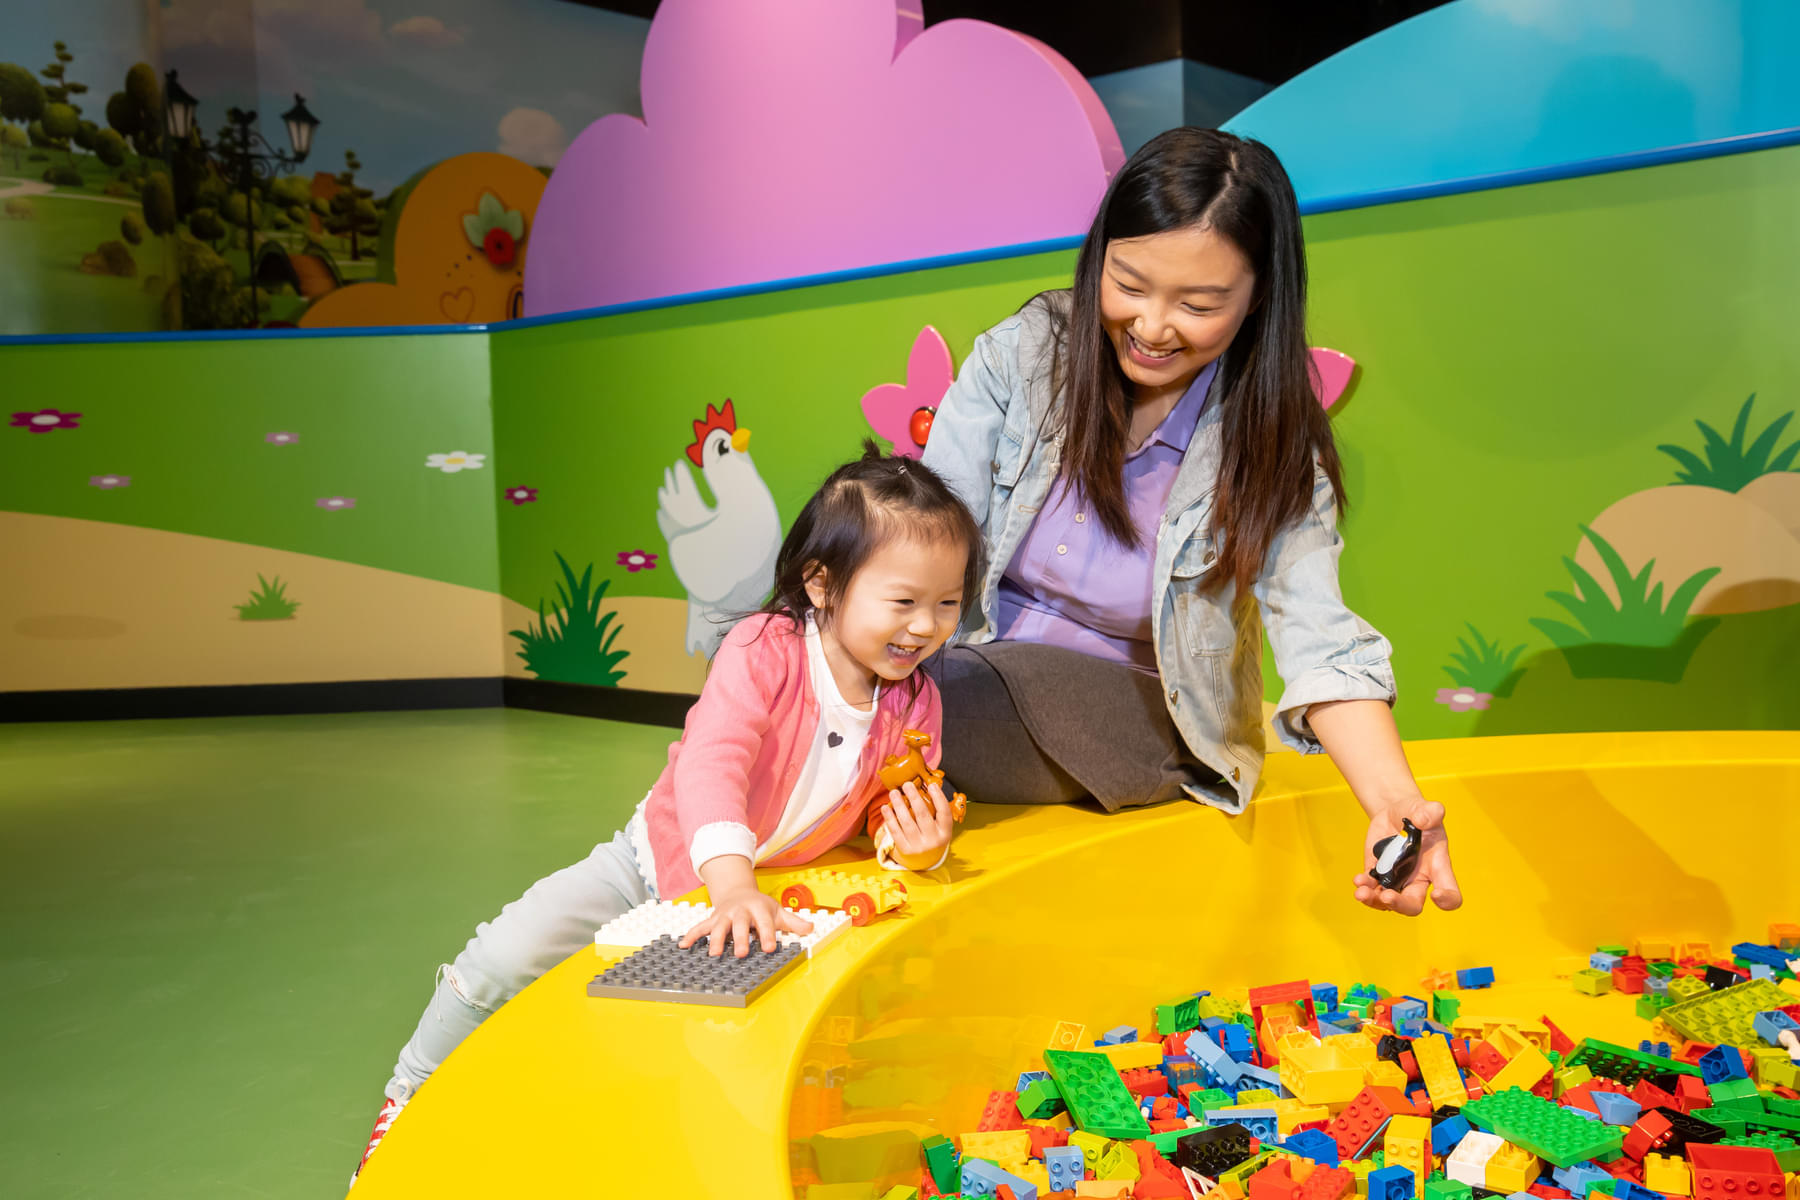 Have a day filled with fun and laughter with kids at LEGOLAND®